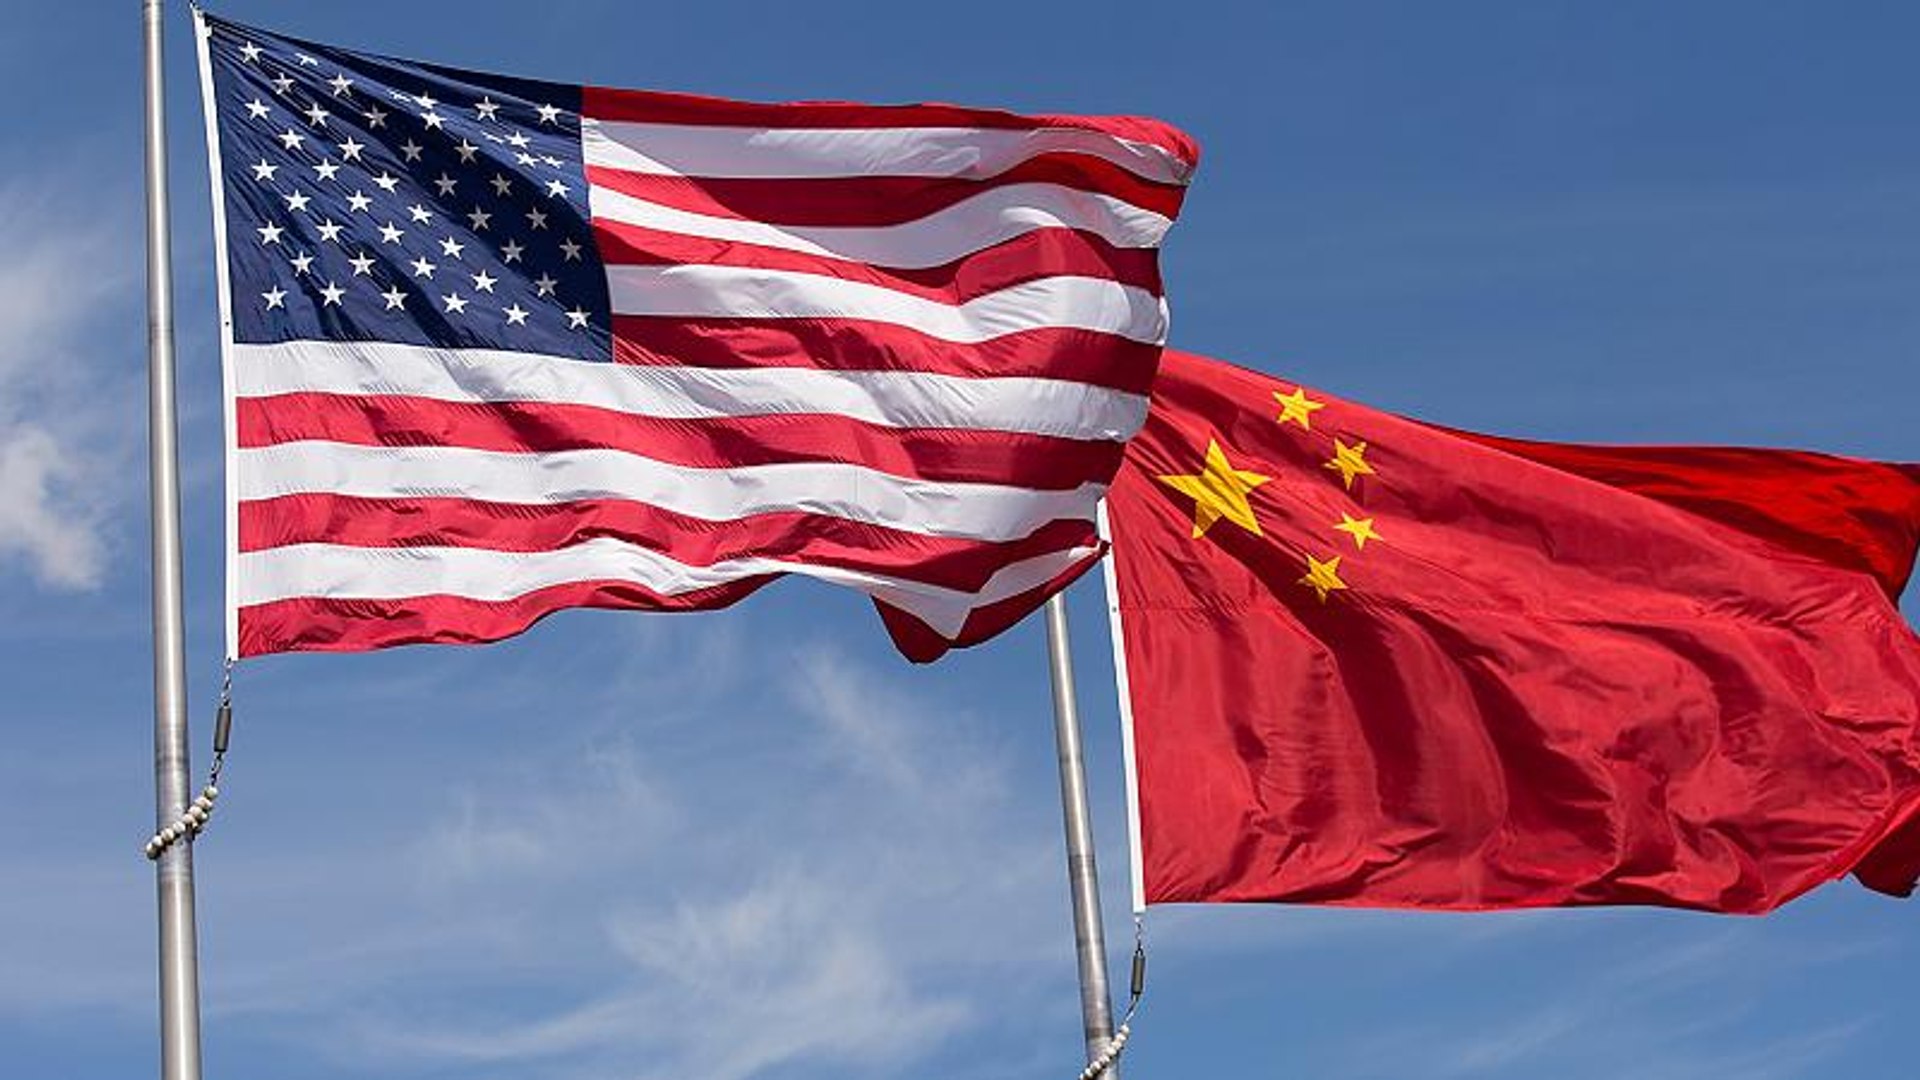 JPE | Economic and Trade Agreement between USA and China